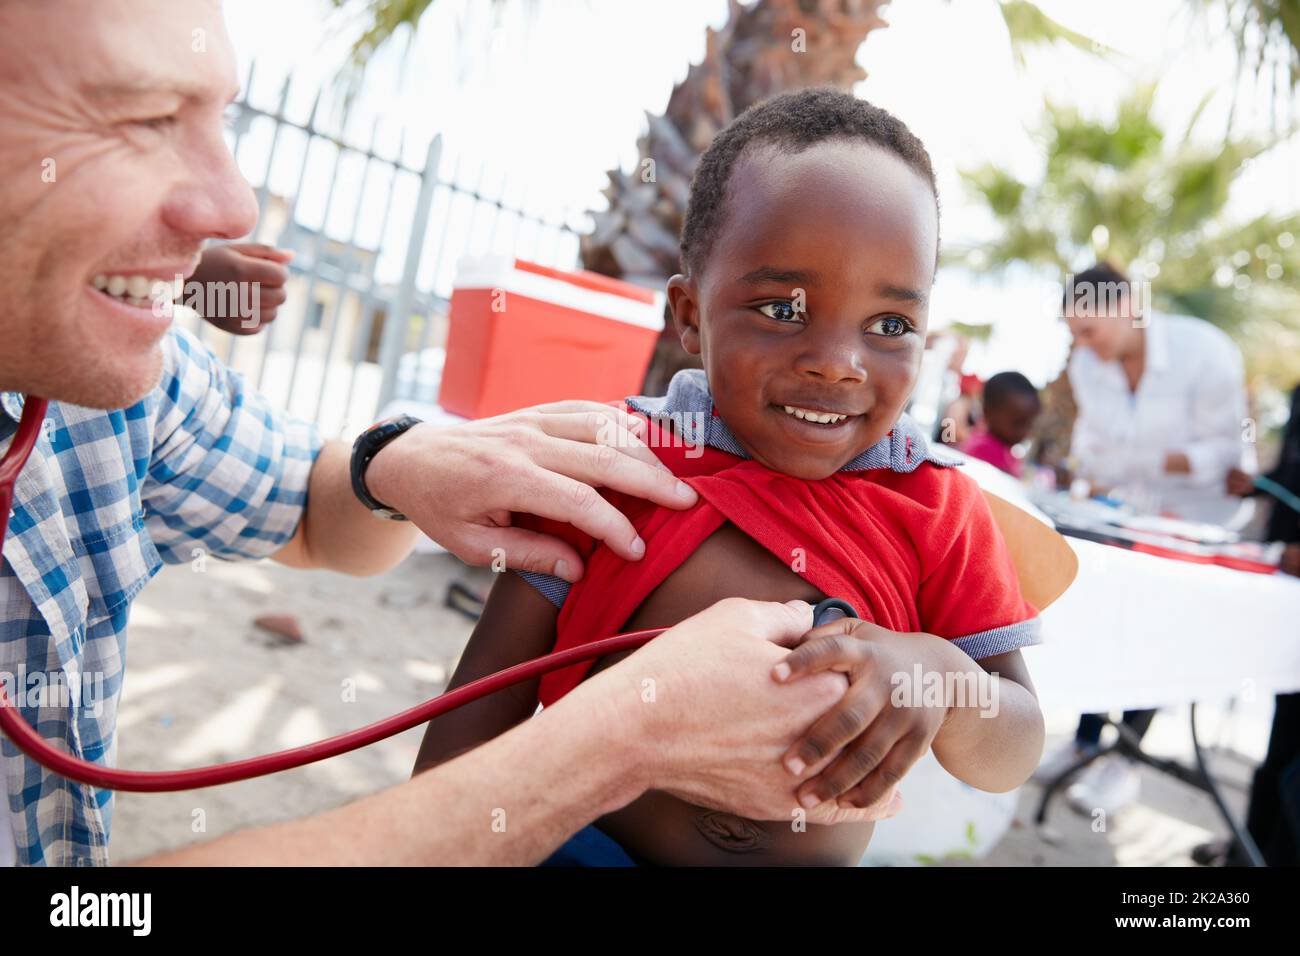 Every child deserves a healthy start in life. Shot of a volunteer doctor giving checkups to underprivileged kids. Stock Photo